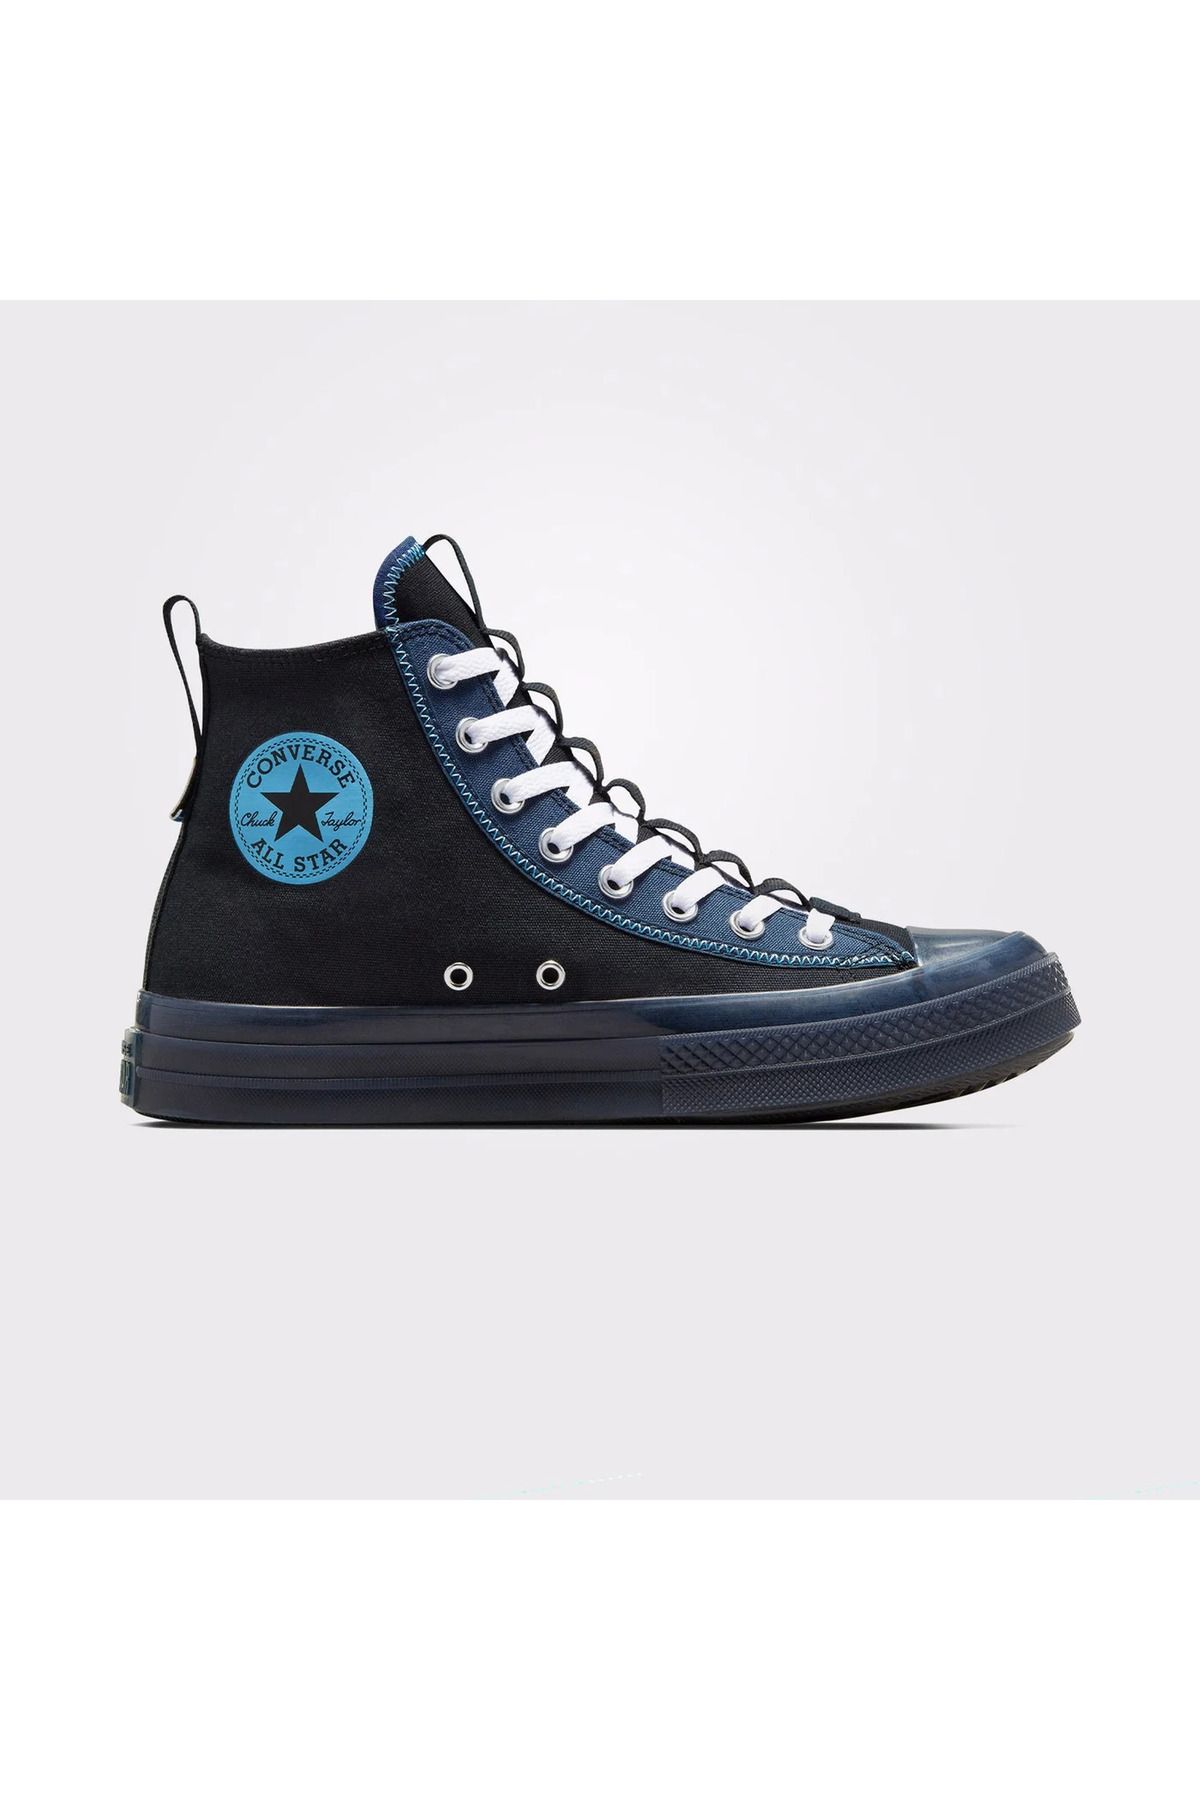 Converse Chuck Taylor All Star Cx Explore Sport Remastered Unisex Siyah Sneaker